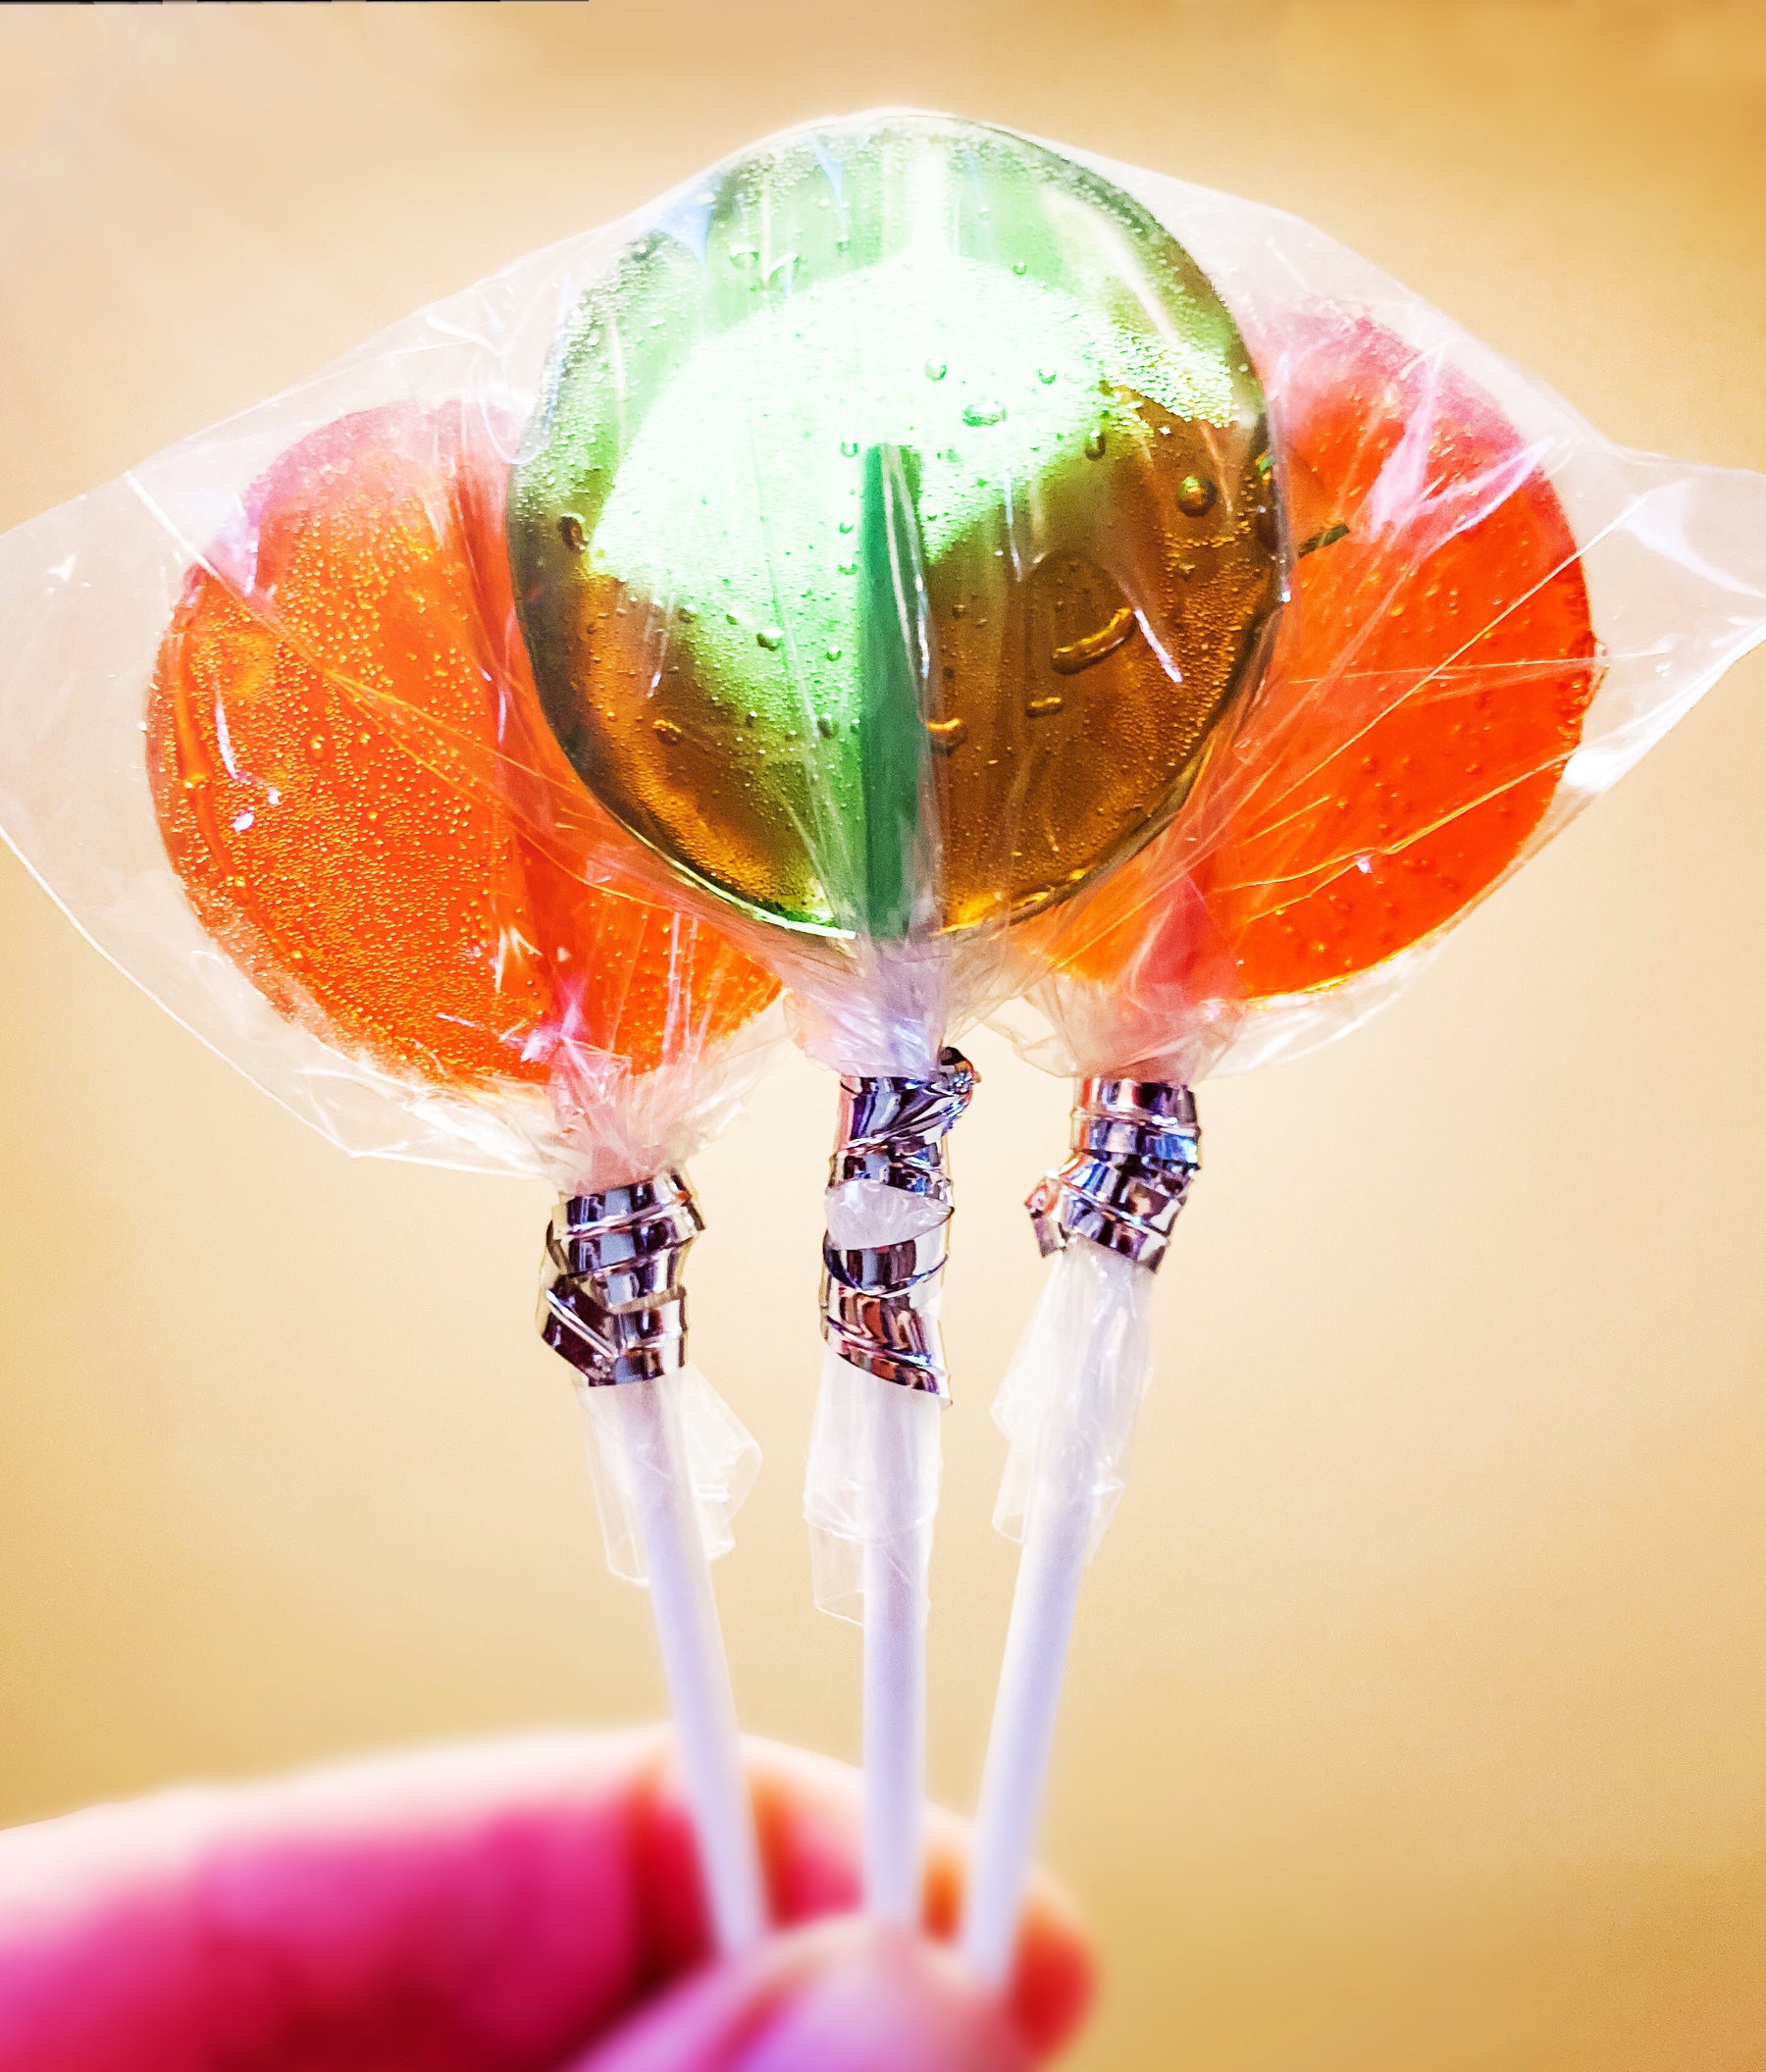 cinnamon habanero or key lime habanero pepper jelly lollipops one free with every order / purchase | Rocque The House Pepper Jelly